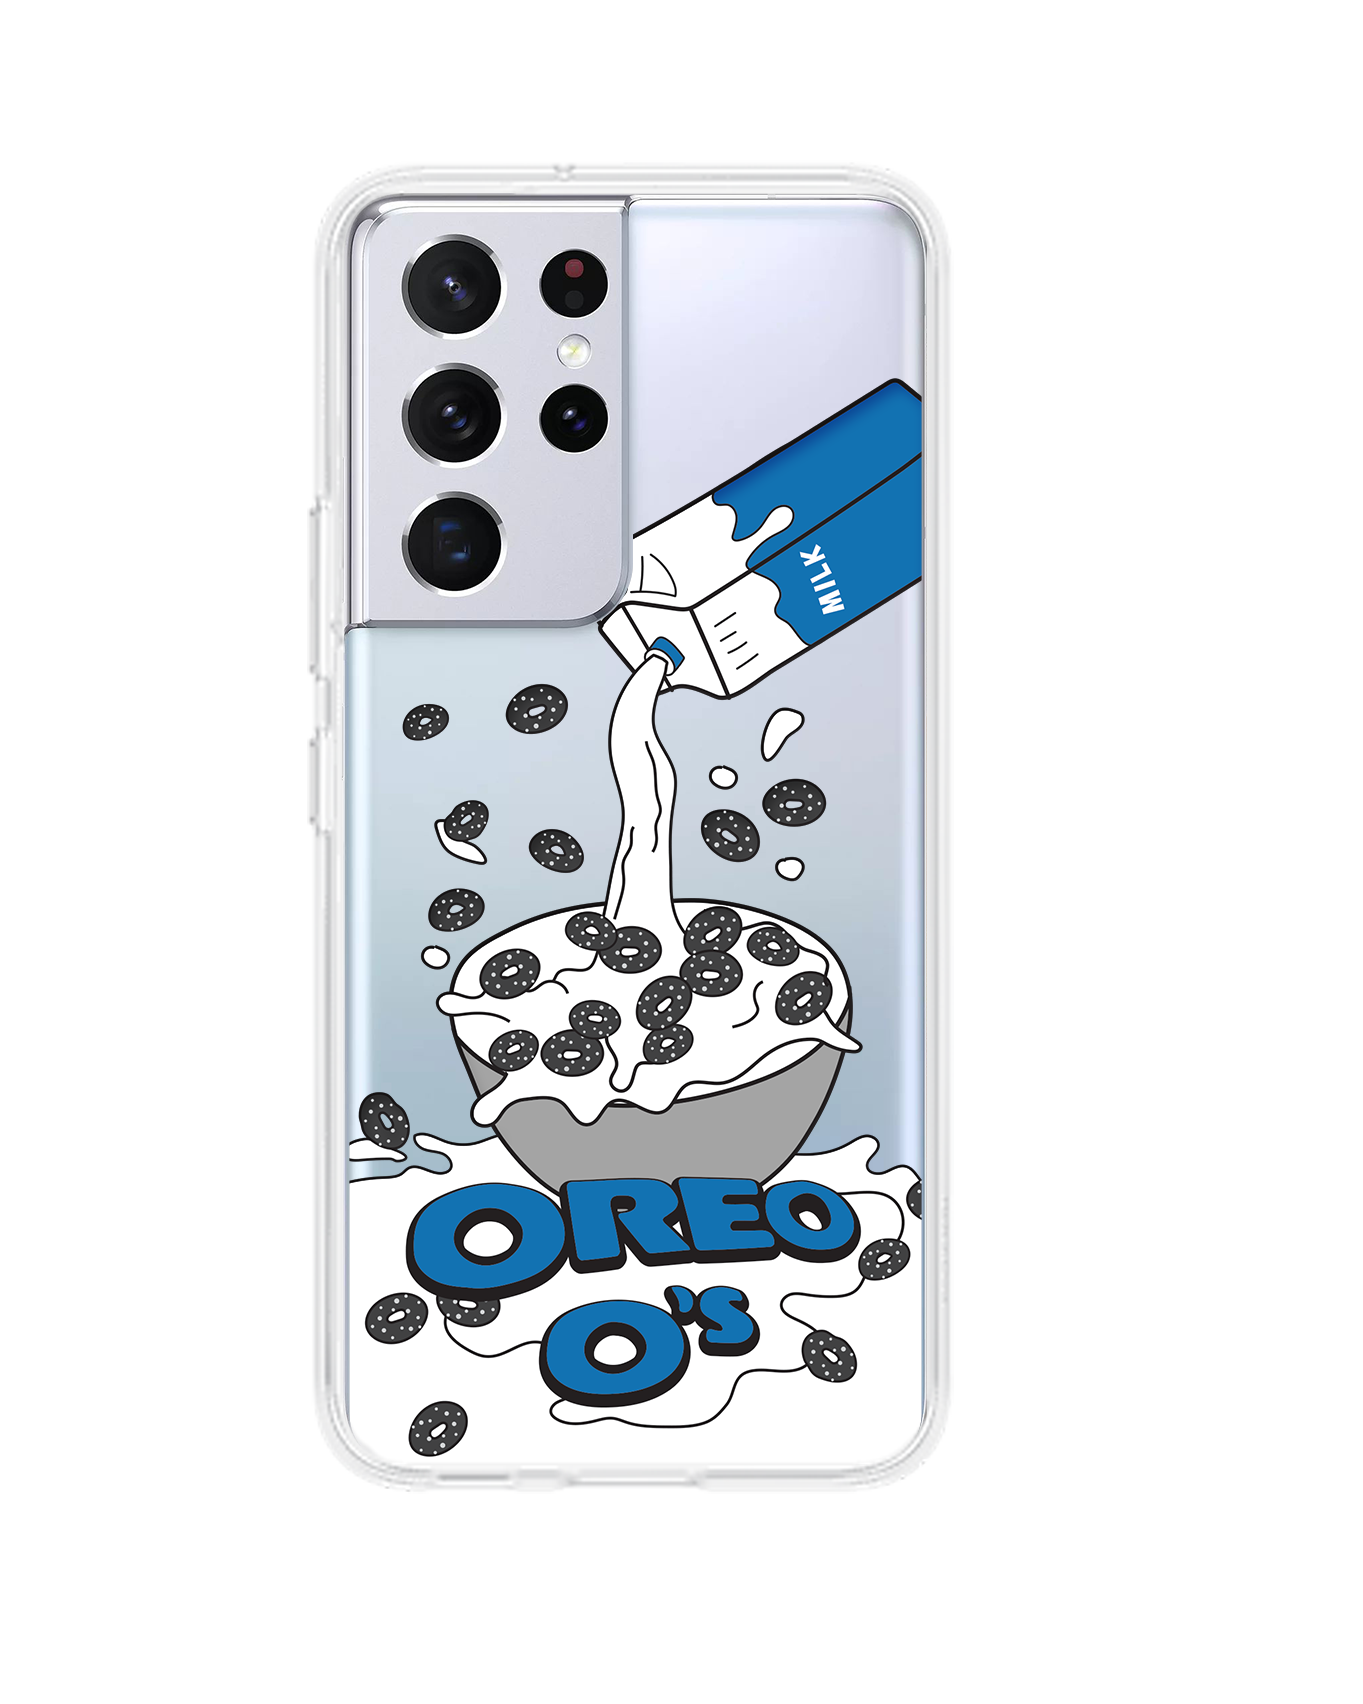 Android Rearguard Hybrid Case - Cereal-O's 2.0